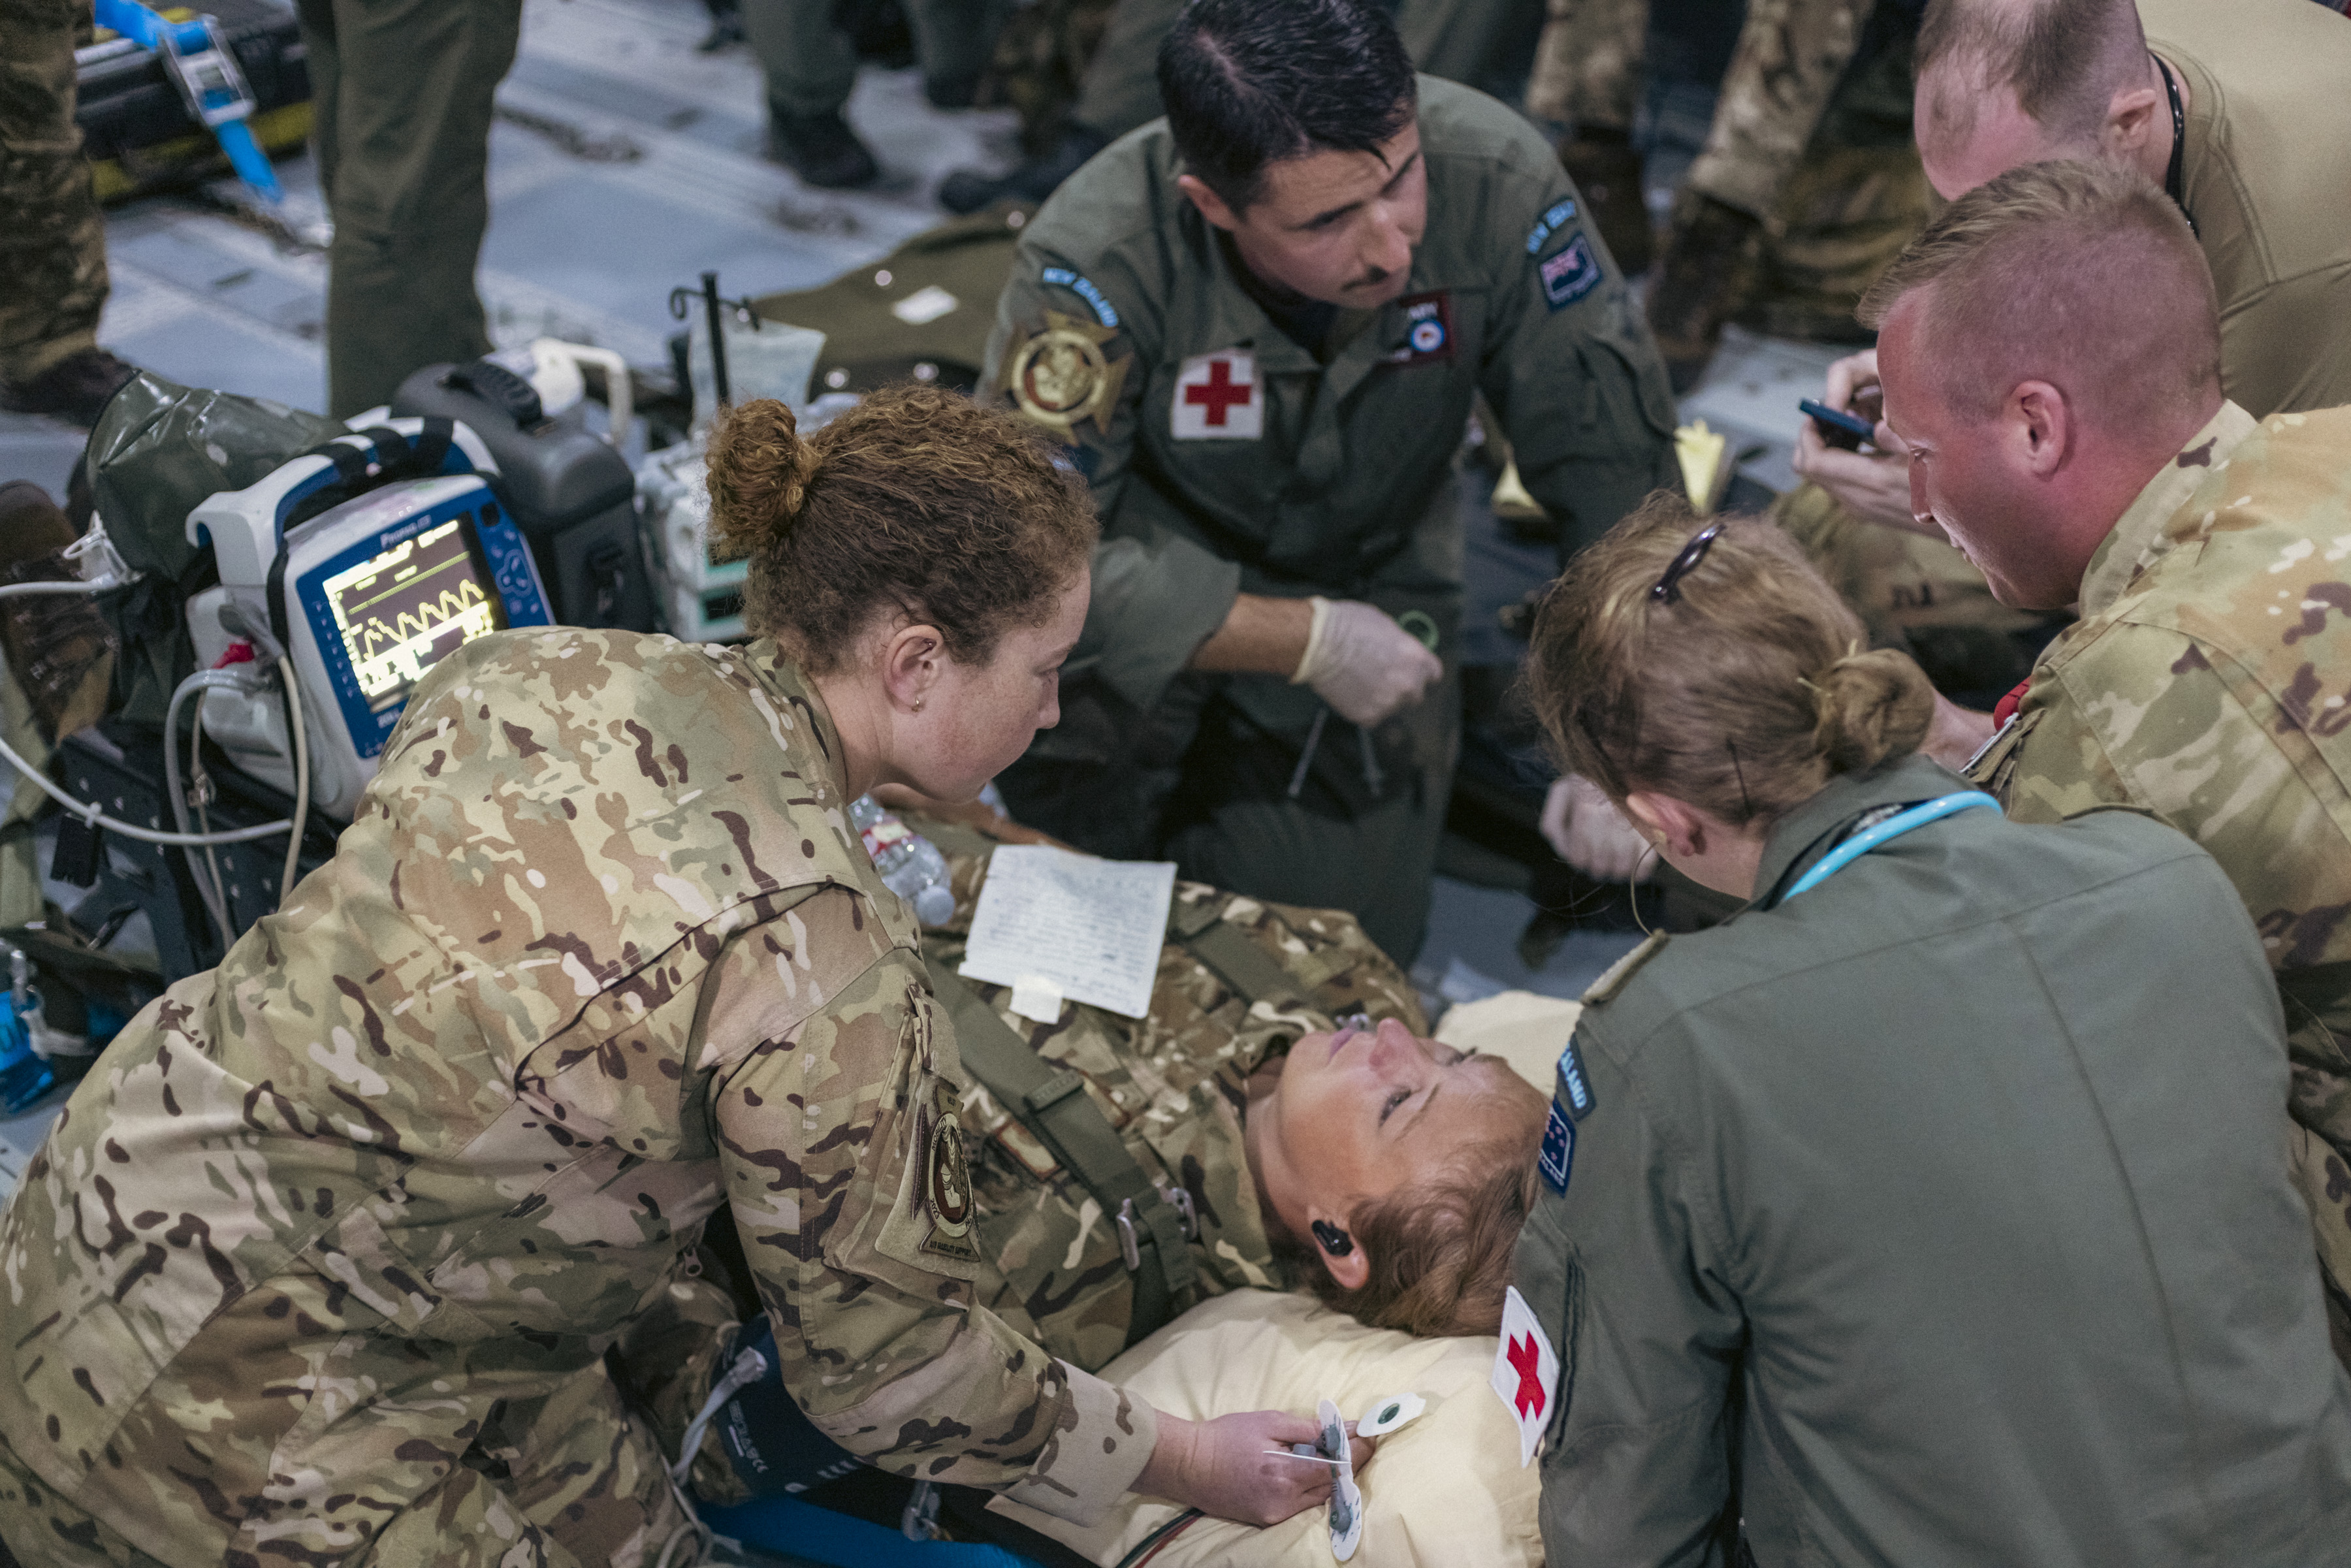 Colleagues from multiple nations working on a med exercise onboard an RAF aircraft